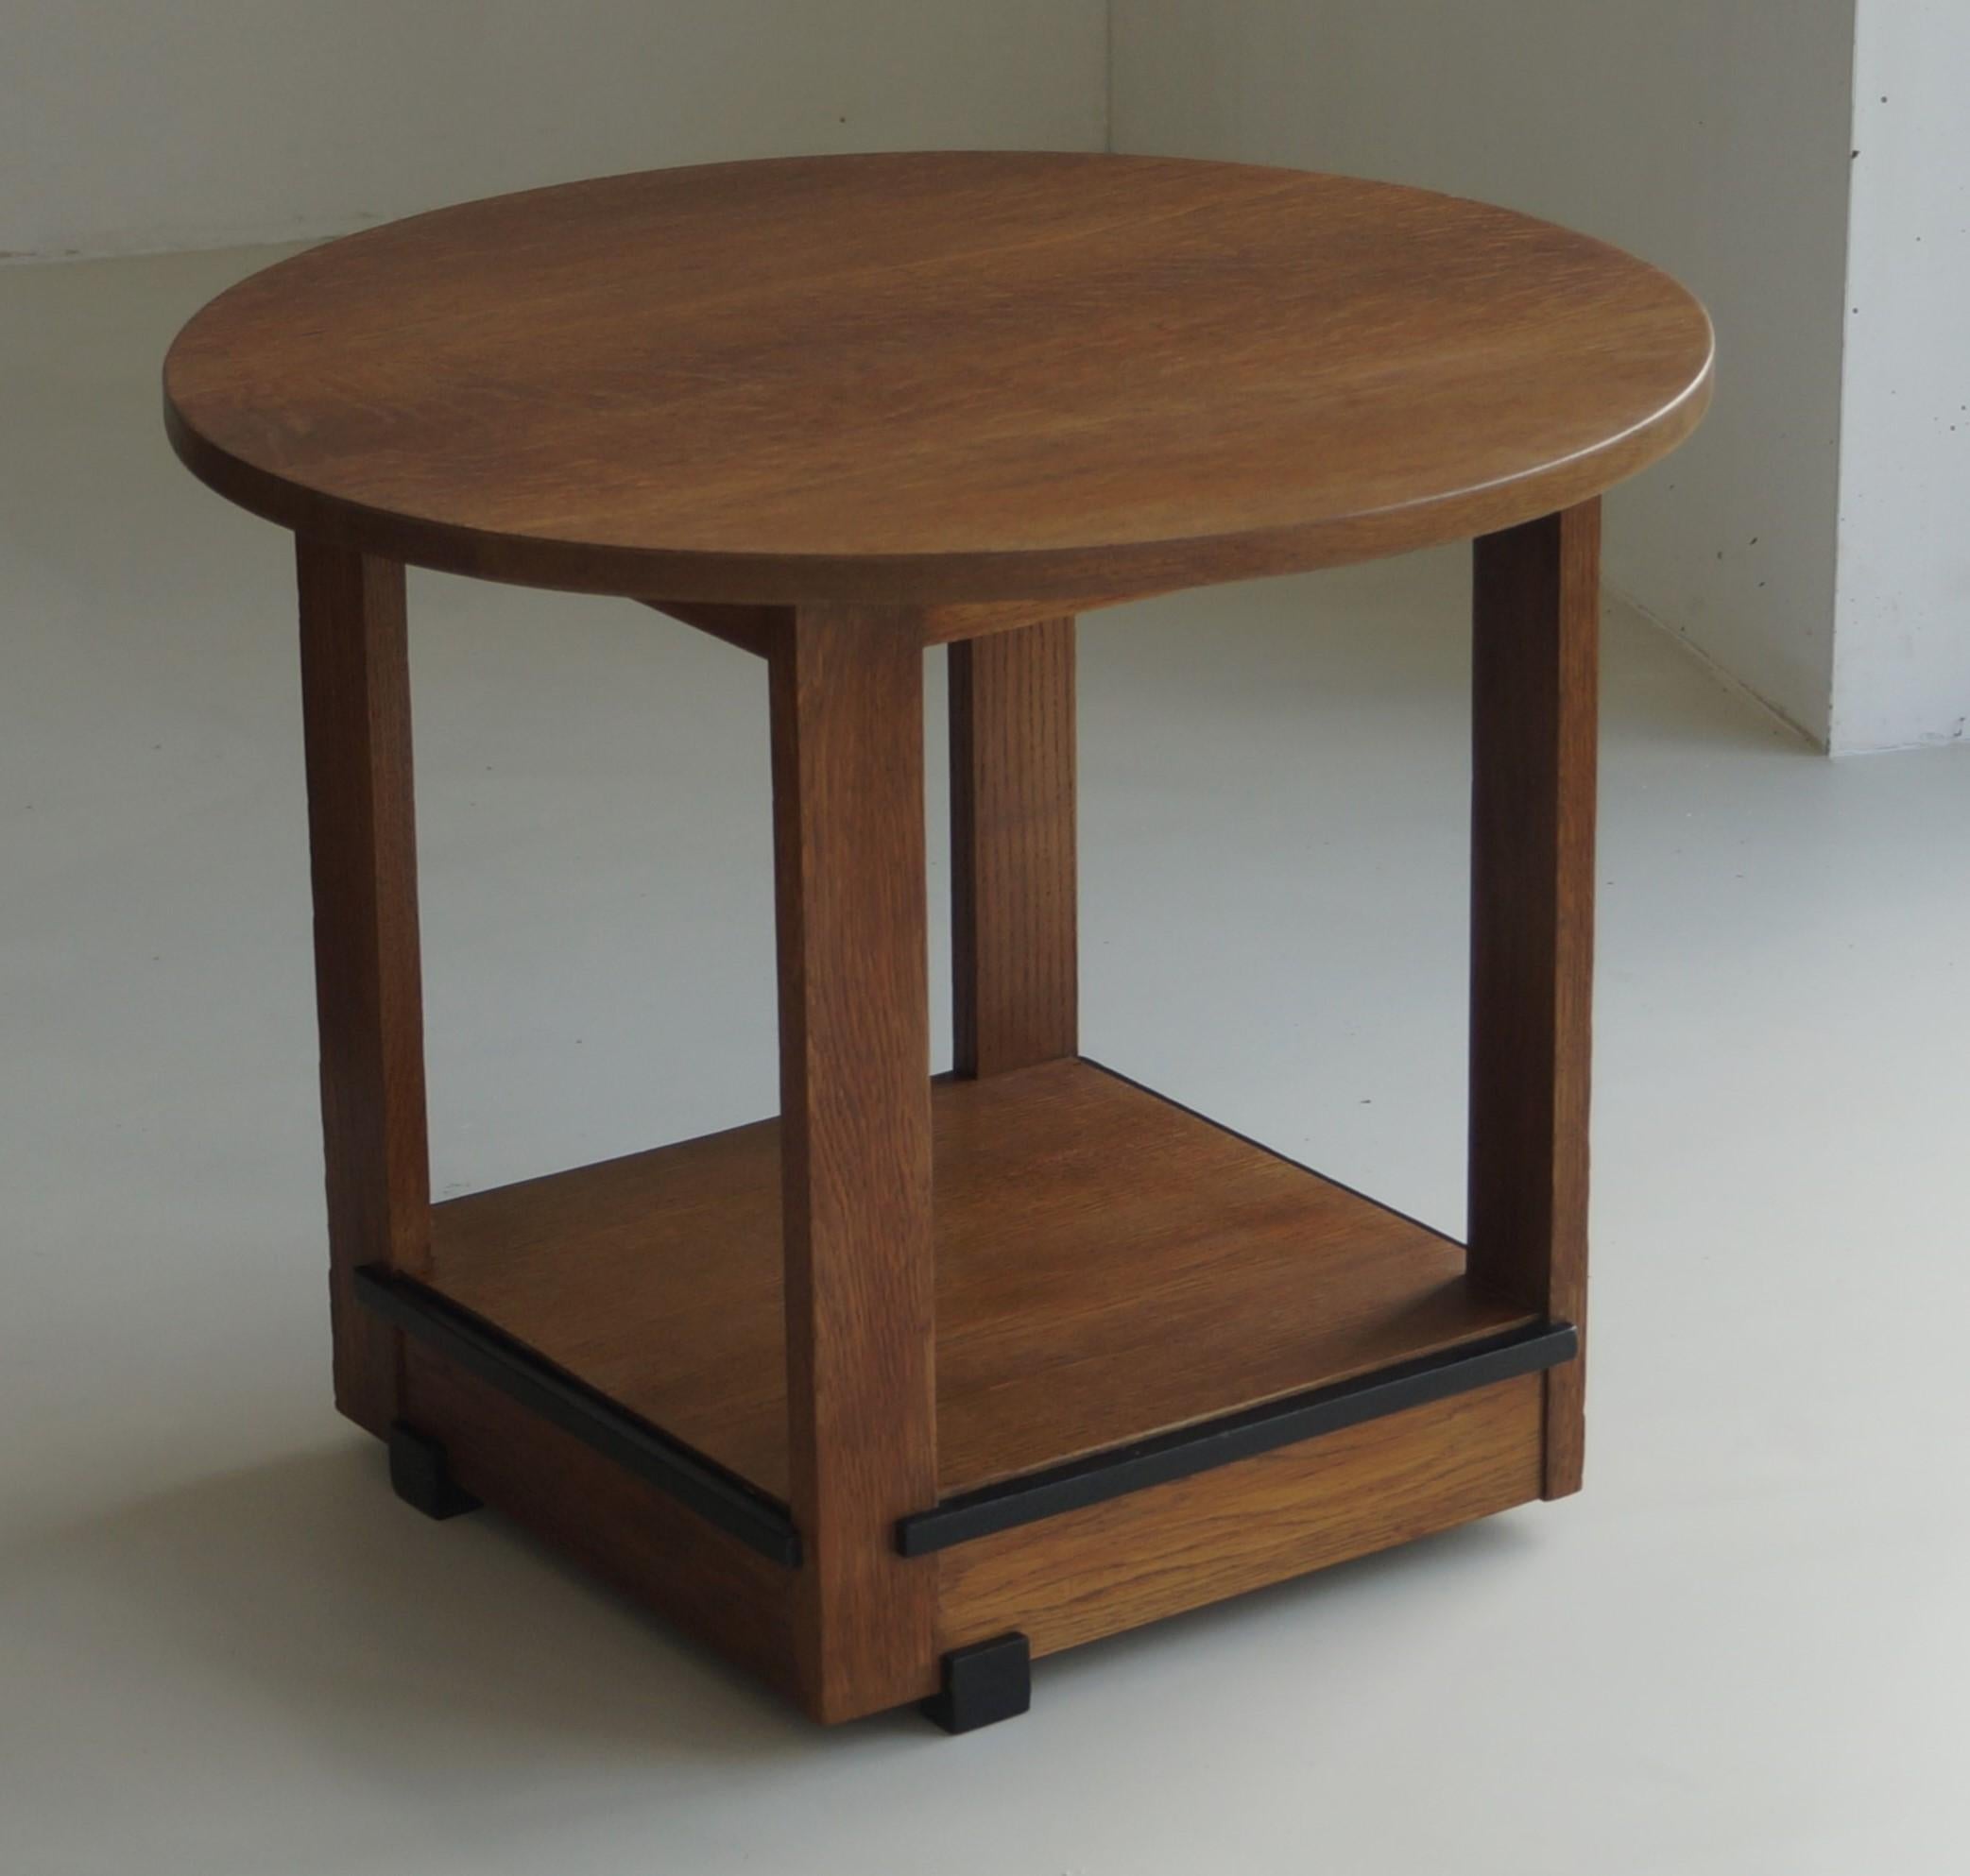 Modernist Dutch Art Deco occasional table attributed to Jan Brunott, 1920s For Sale 6